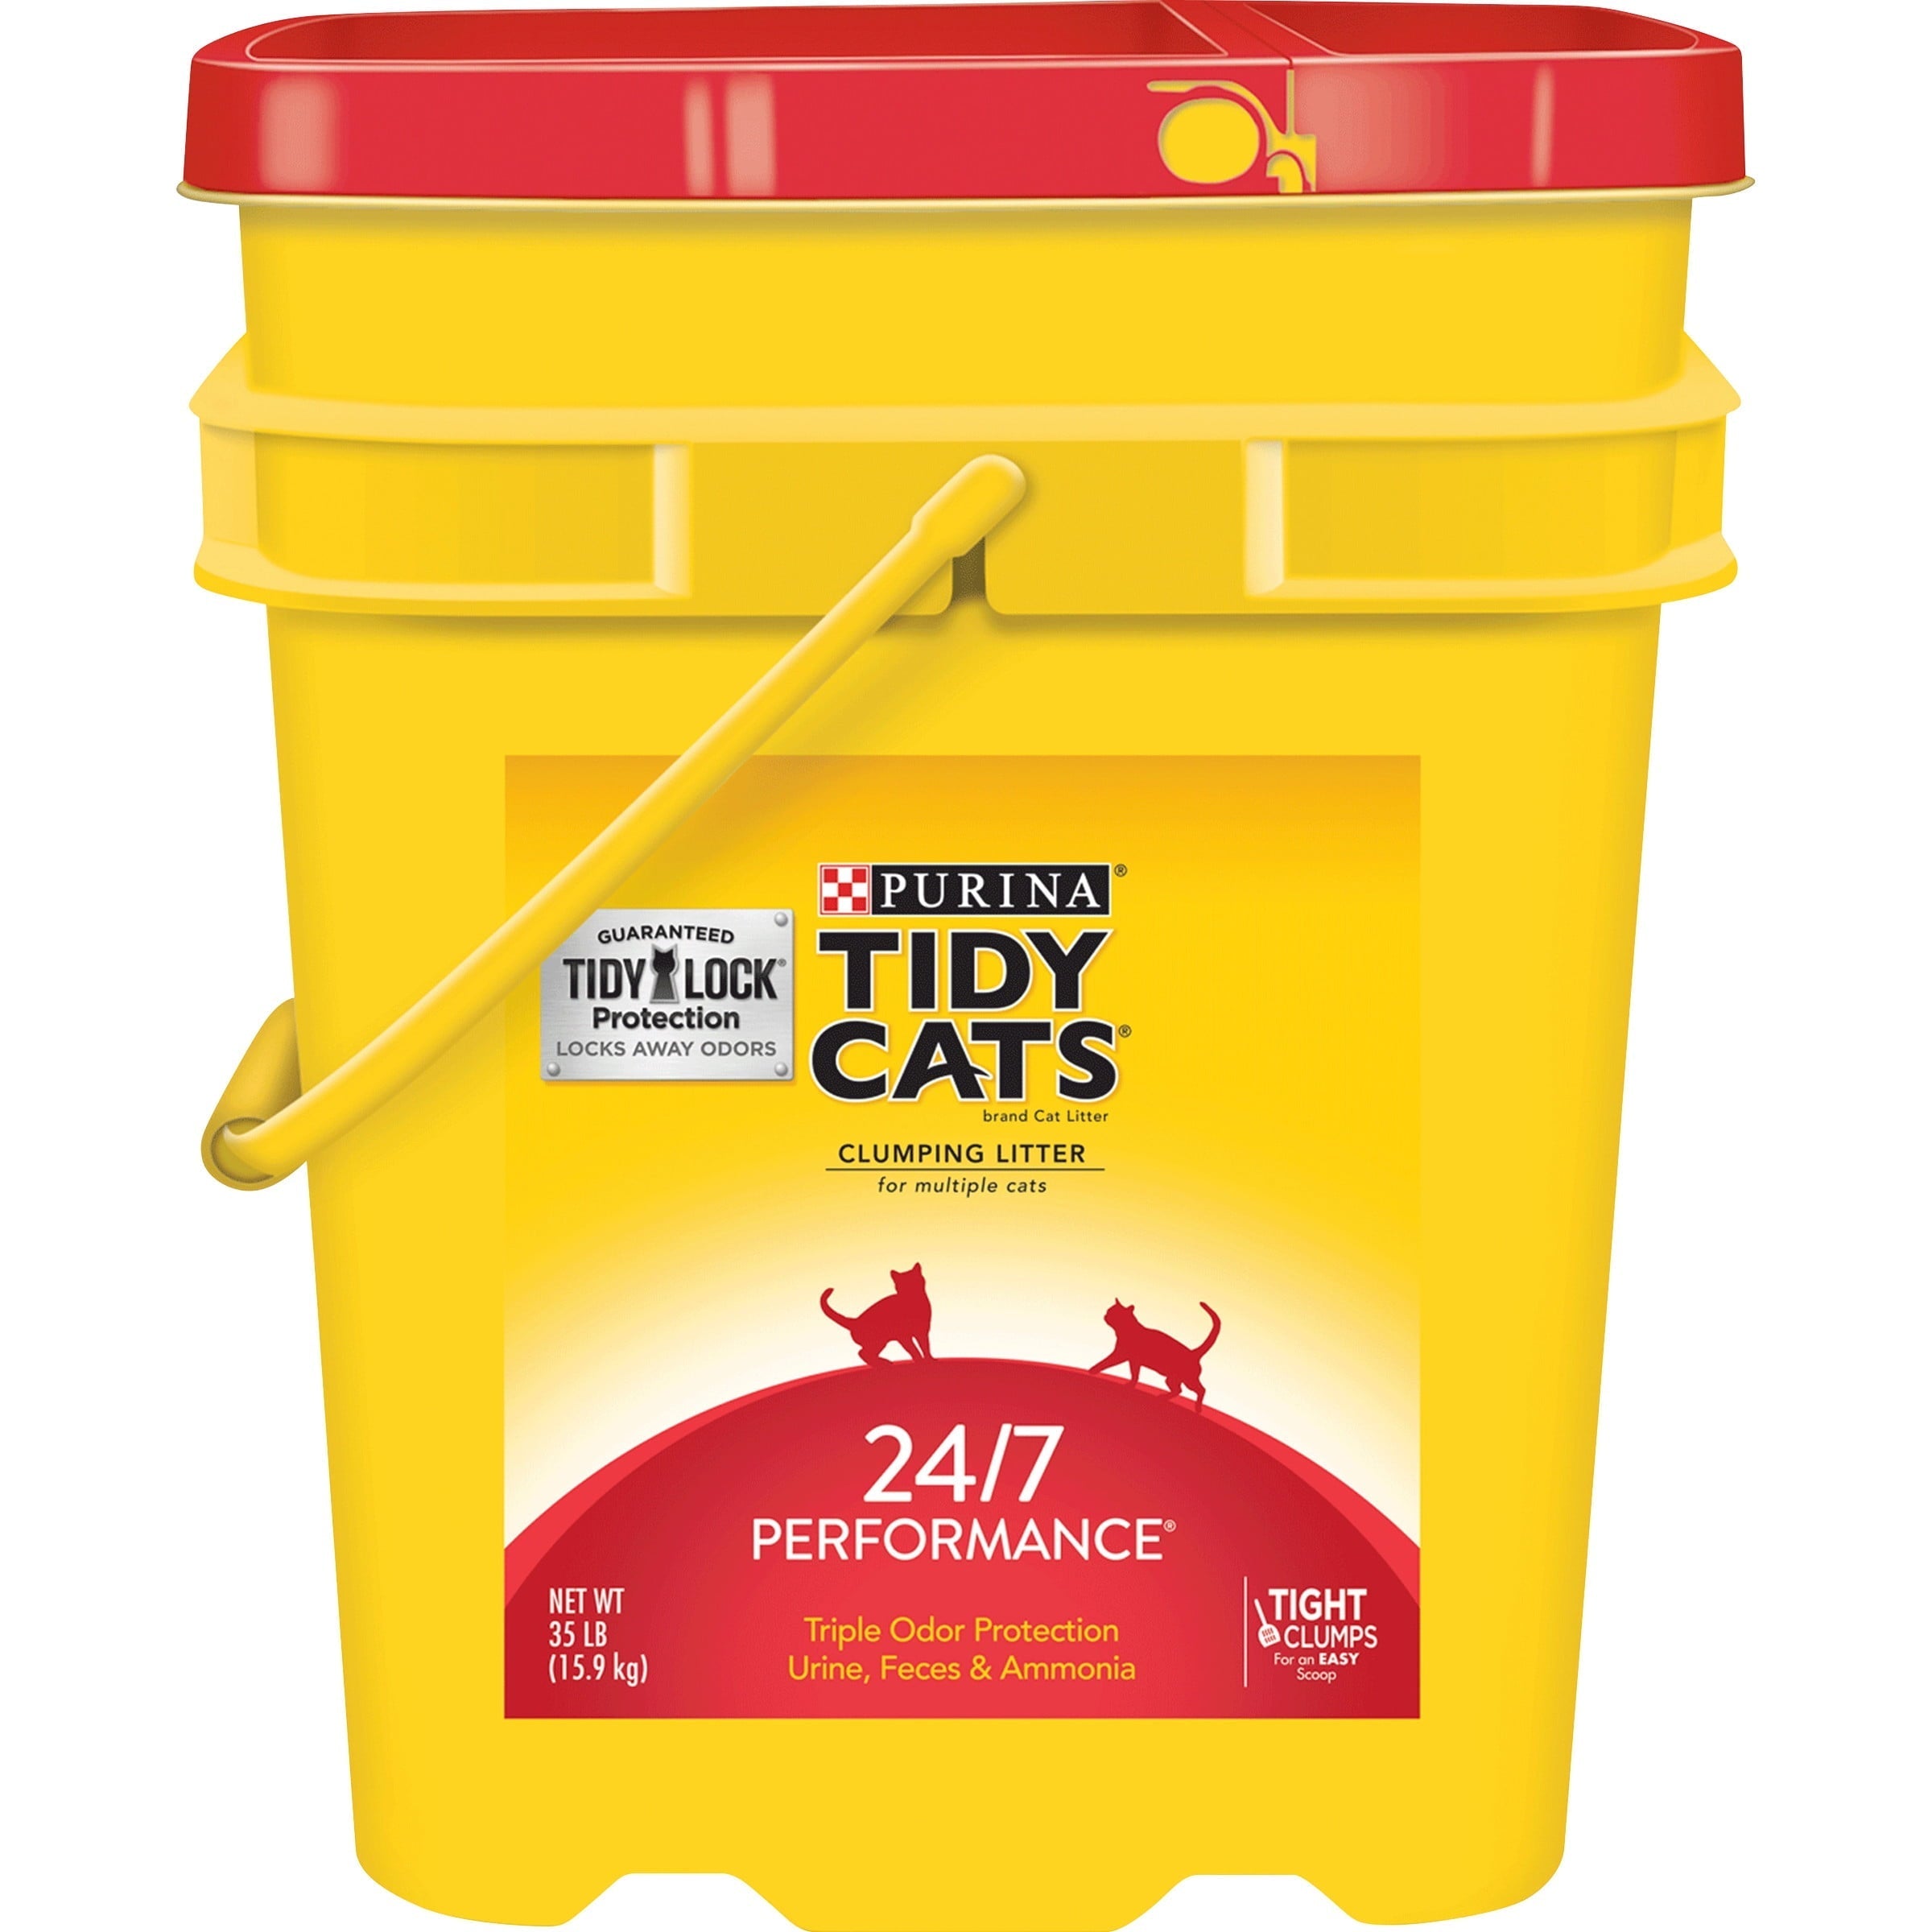 Wholesale prices with free shipping all over United States Purina Tidy Cats Clumping Cat Litter, 24/7 Performance Multi Cat Litter, 35 lb. Pail - Steven Deals